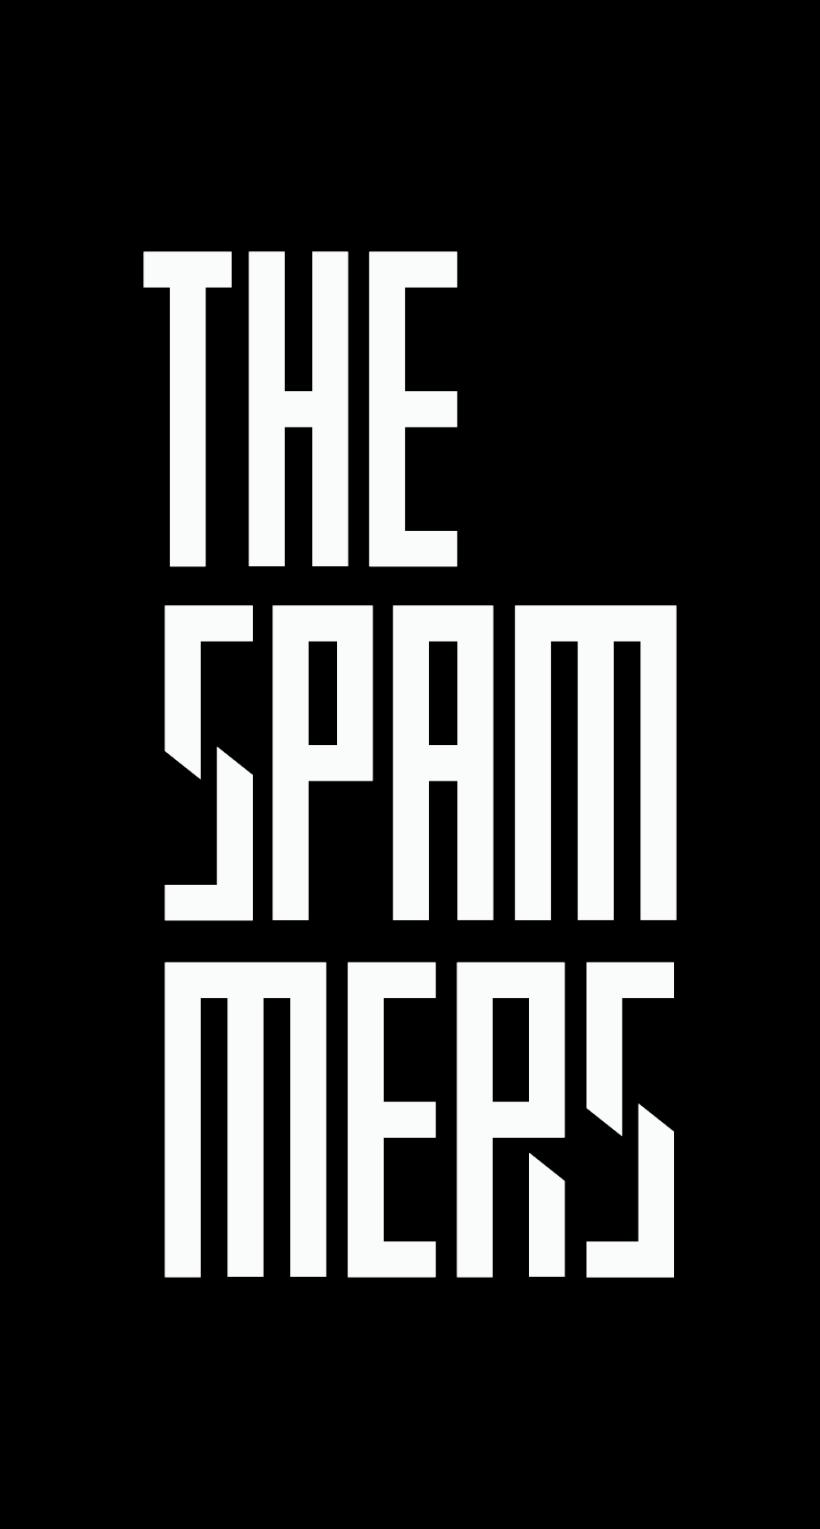 The Spammers isologo 4